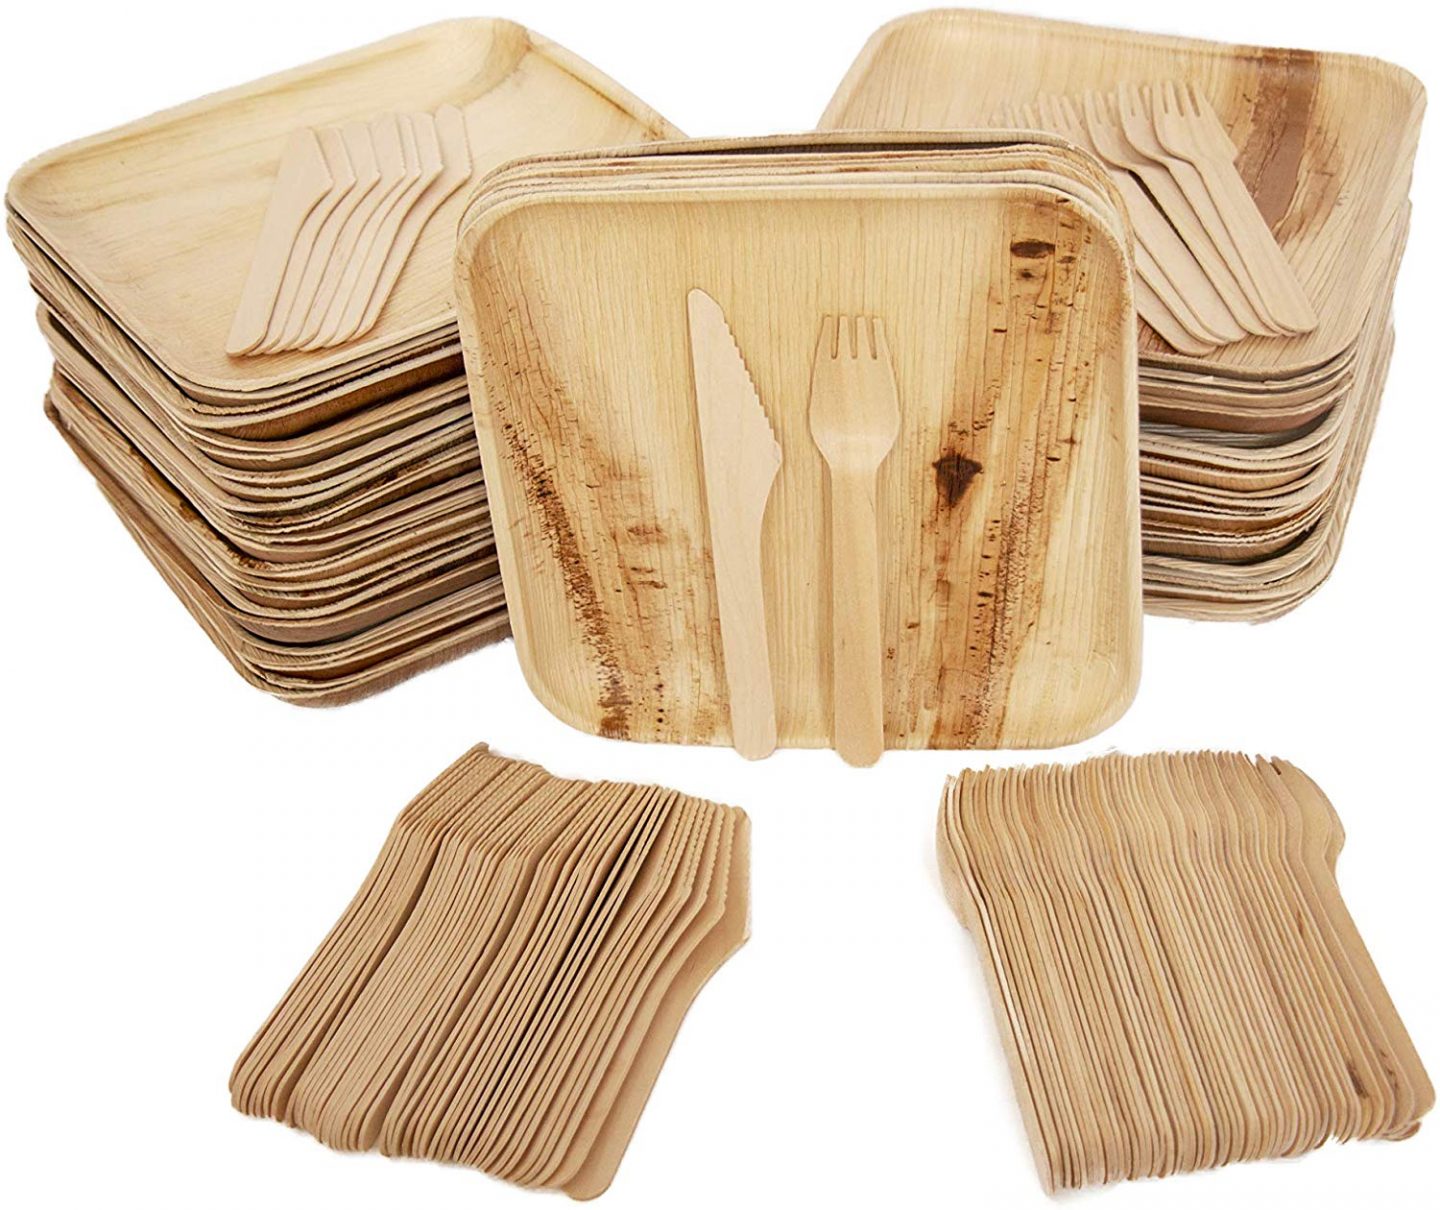 bamboo plates and forks